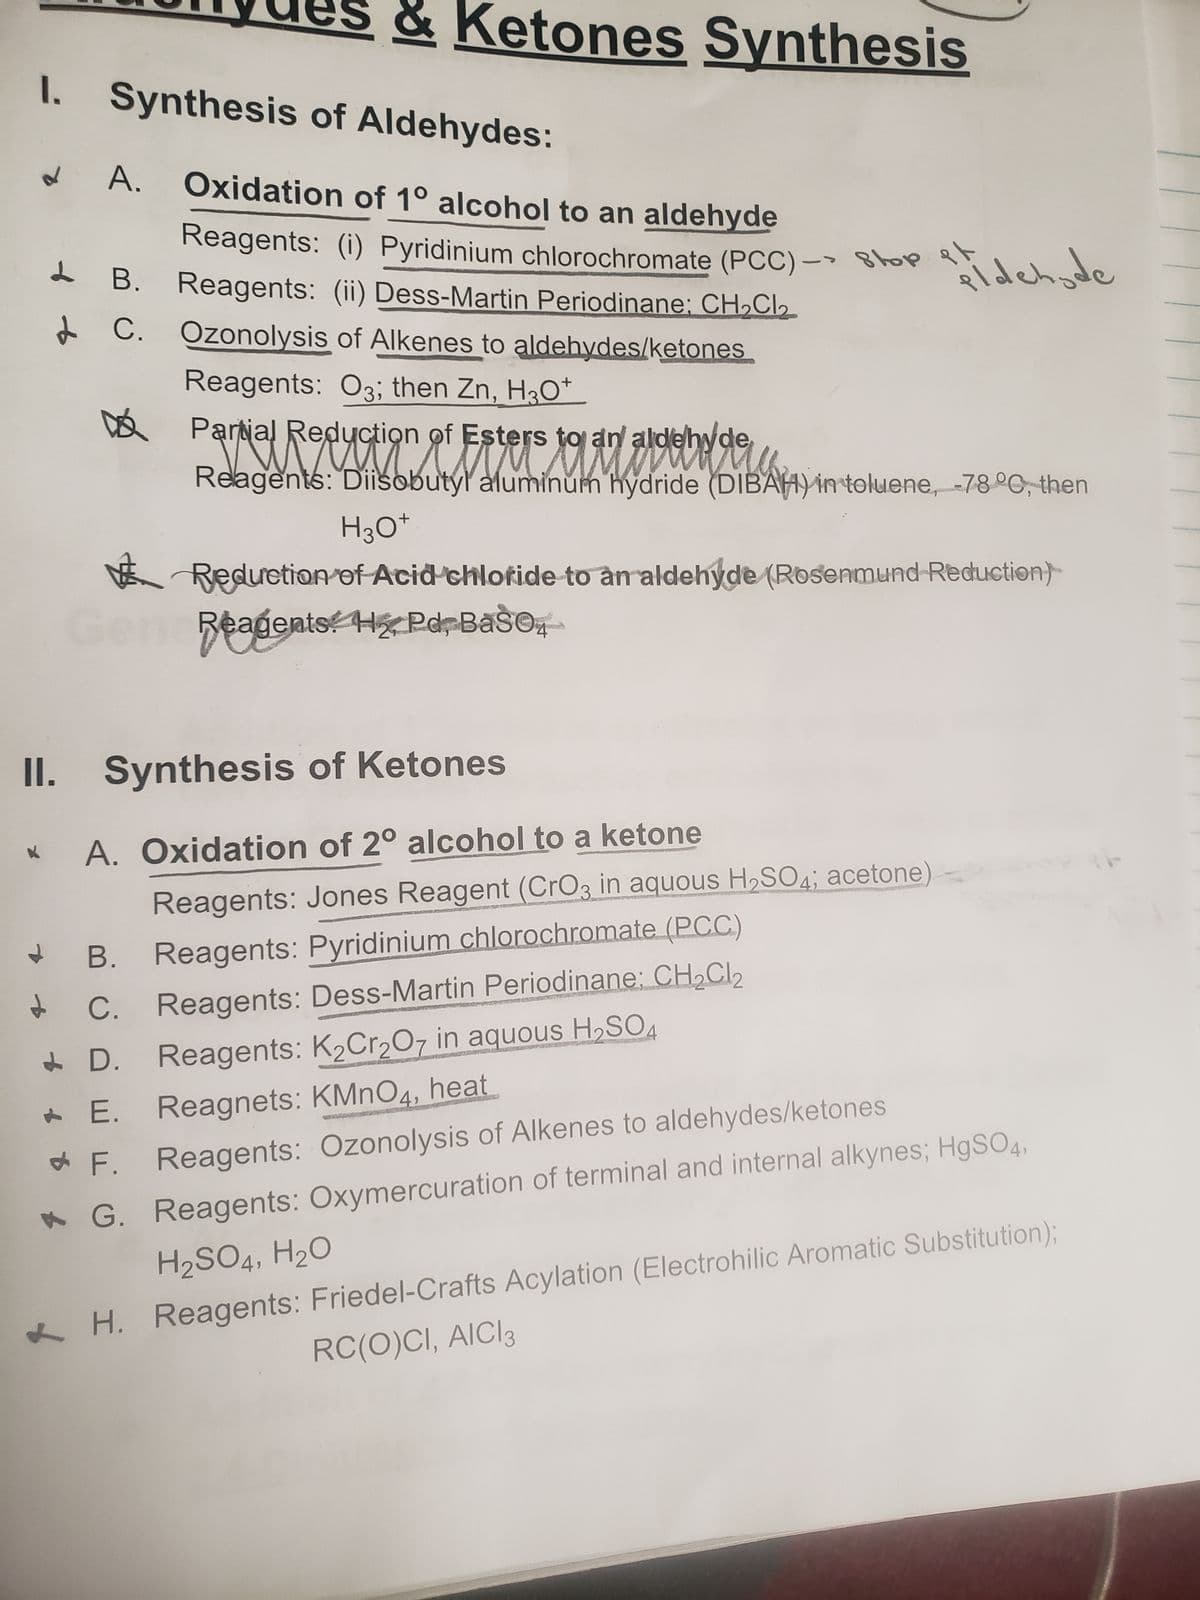 1. Synthesis of Aldehydes:
8
B.
C.
& Ketones Synthesis
A. Oxidation of 1° alcohol to an aldehyde
D
PA
Reagents: (i) Pyridinium chlorochromate (PCC)-> top
Reagents: (ii) Dess-Martin Periodinane; CH₂Cl₂
B.
C.
Ozonolysis of Alkenes to aldehydes/ketones
Reagents: 03; then Zn, H3O+
II. Synthesis of Ketones
A. Oxidation of 2° alcohol to a ketone
Reagents: Jones Reagent (CrO3 in aquous H₂SO4; acetone)
Reagents: Pyridinium chlorochromate (PCC)
Reagents: Dess-Martin Periodinane: CH₂Cl₂
Reagents: K₂Cr₂O7 in aquous H₂SO4
pidehode
Red
M
Partial Reduction of Esters to an aldehyde
Relagents: Diisobutyl aluminum hydride (DIBAH) in toluene, -78 °C, then
H3O+
Reduction of Acid chloride to an aldehyde (Rosenmund Reduction)
Reagents H₂, Pd, BaSO4
D.
E. Reagnets: KMnO4, heat
F.
Reagents: Ozonolysis of Alkenes to aldehydes/ketones
G. Reagents: Oxymercuration of terminal and internal alkynes; HgSO4,
H₂SO4, H2₂O
H. Reagents: Friedel-Crafts Acylation (Electrohilic Aromatic Substitution);
RC(O)CI, AICI 3